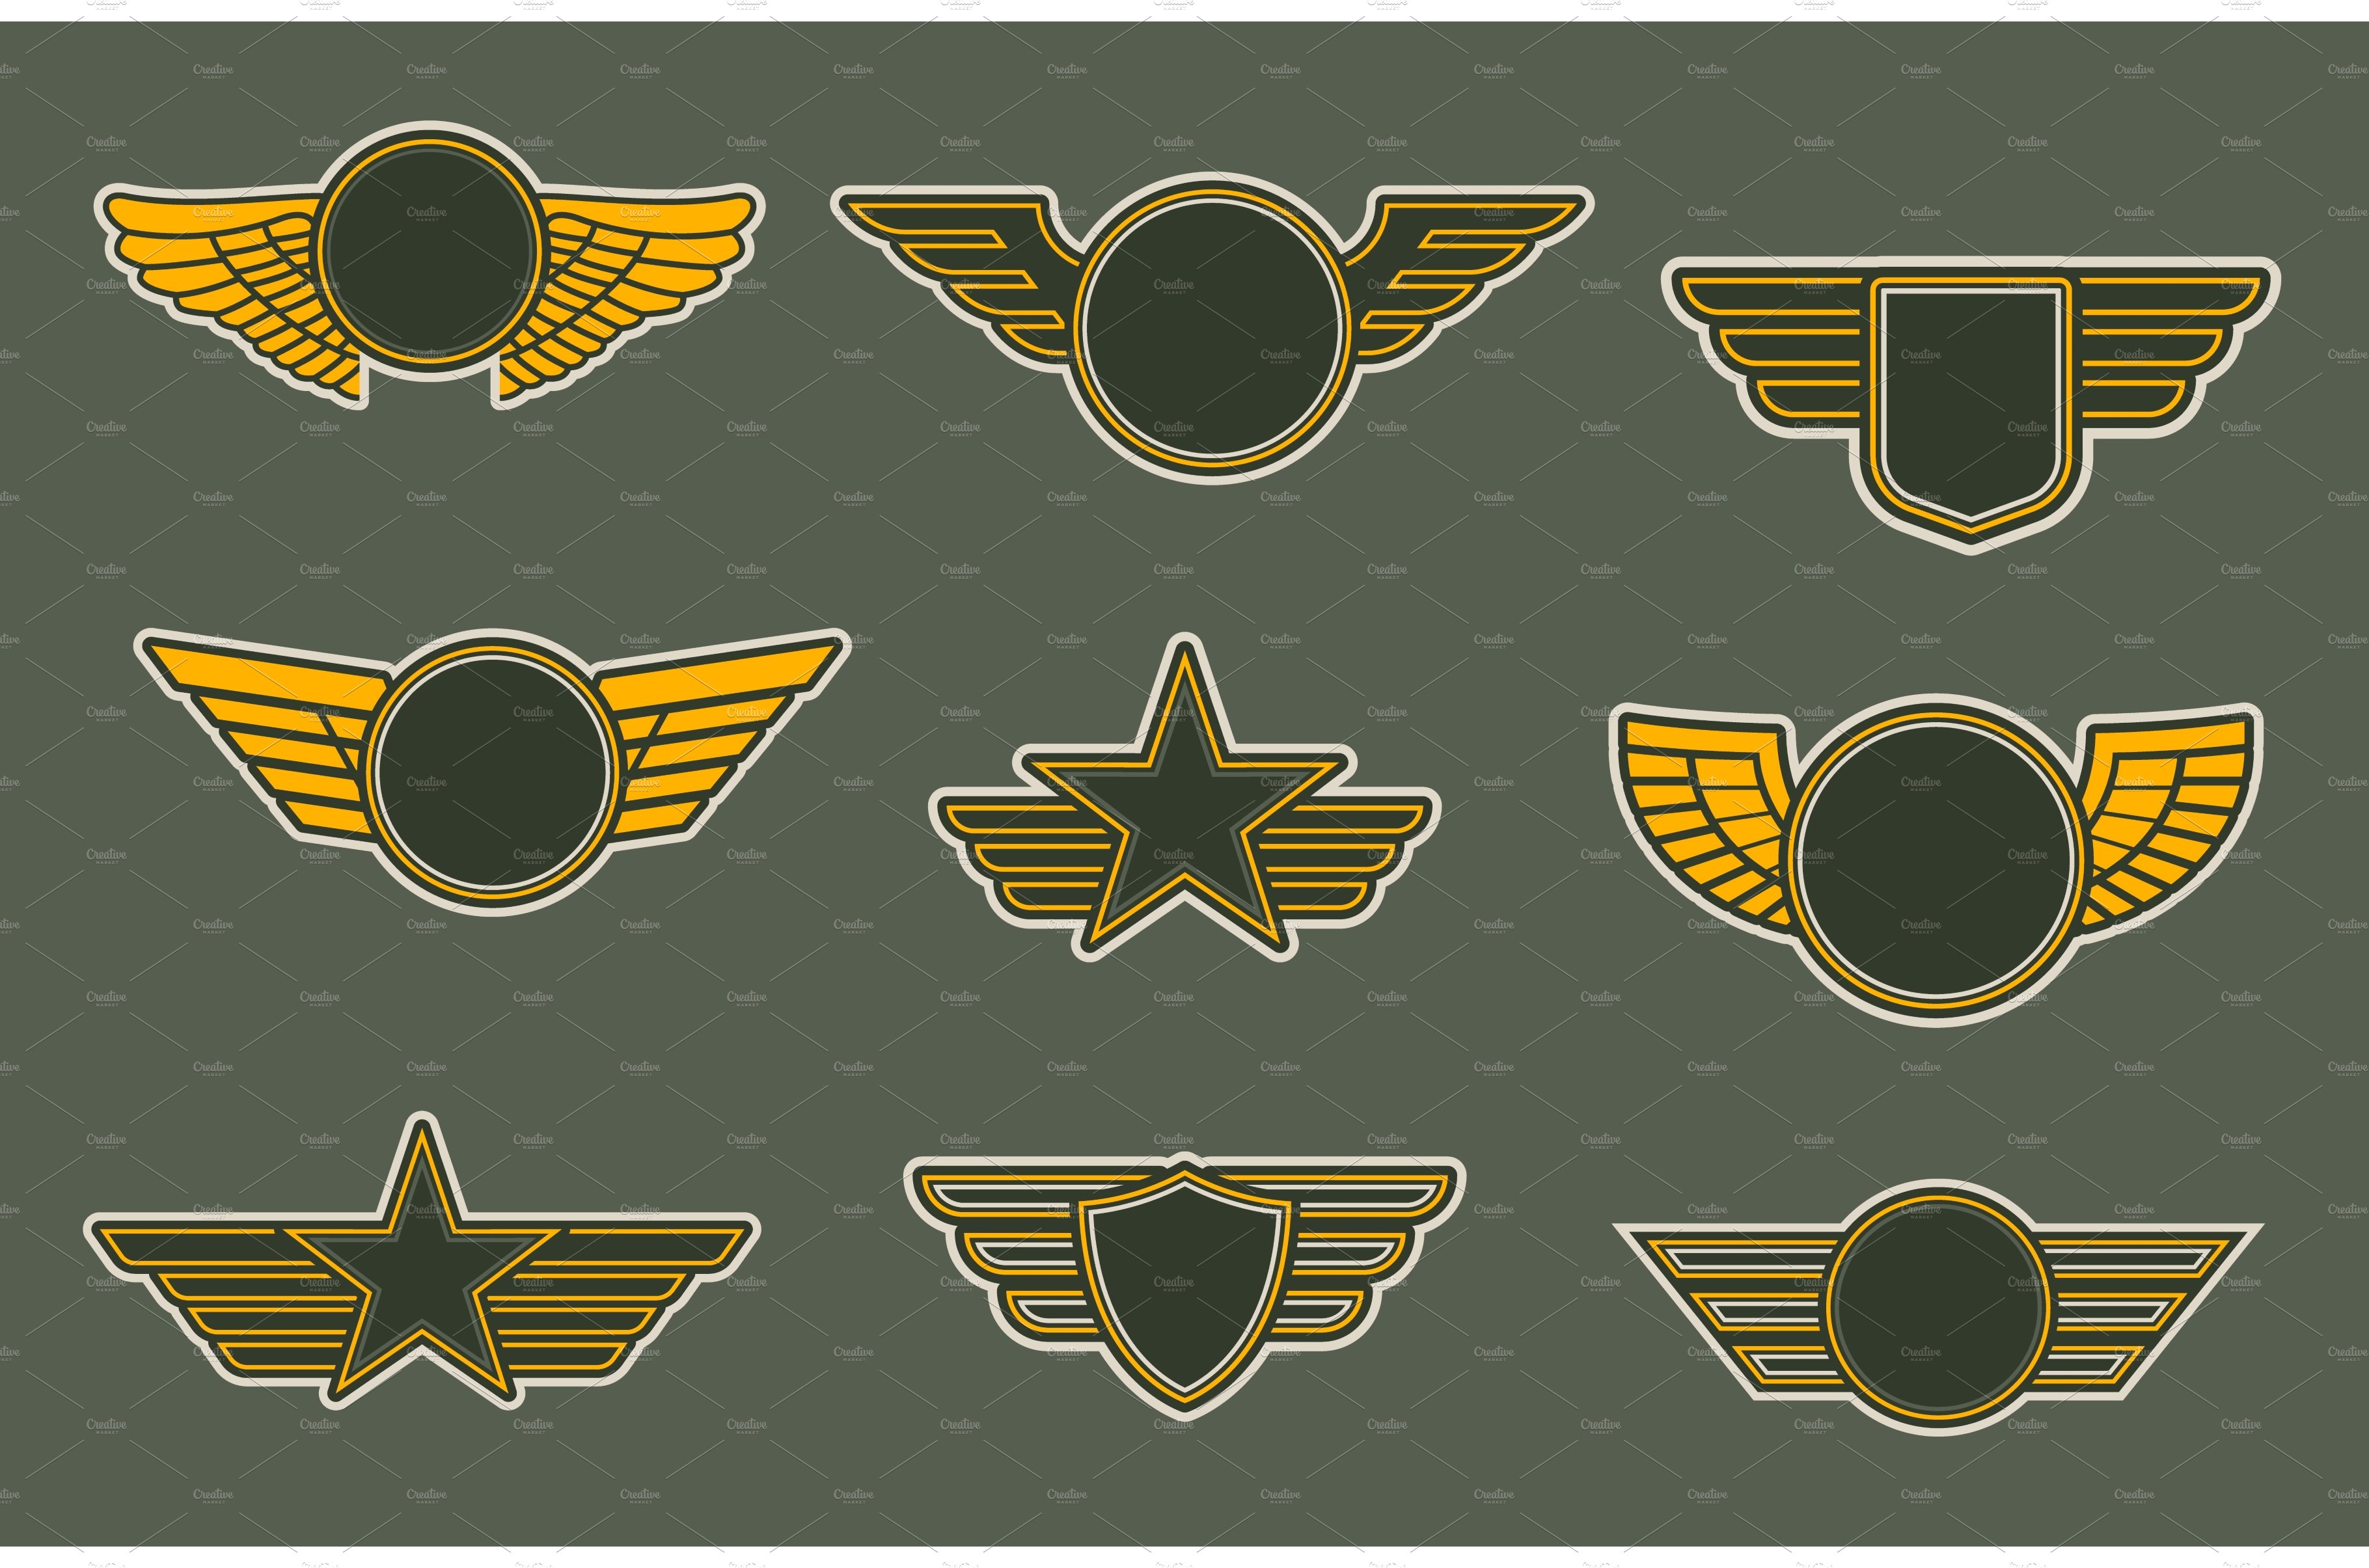 Army patches with wings, heraldry cover image.